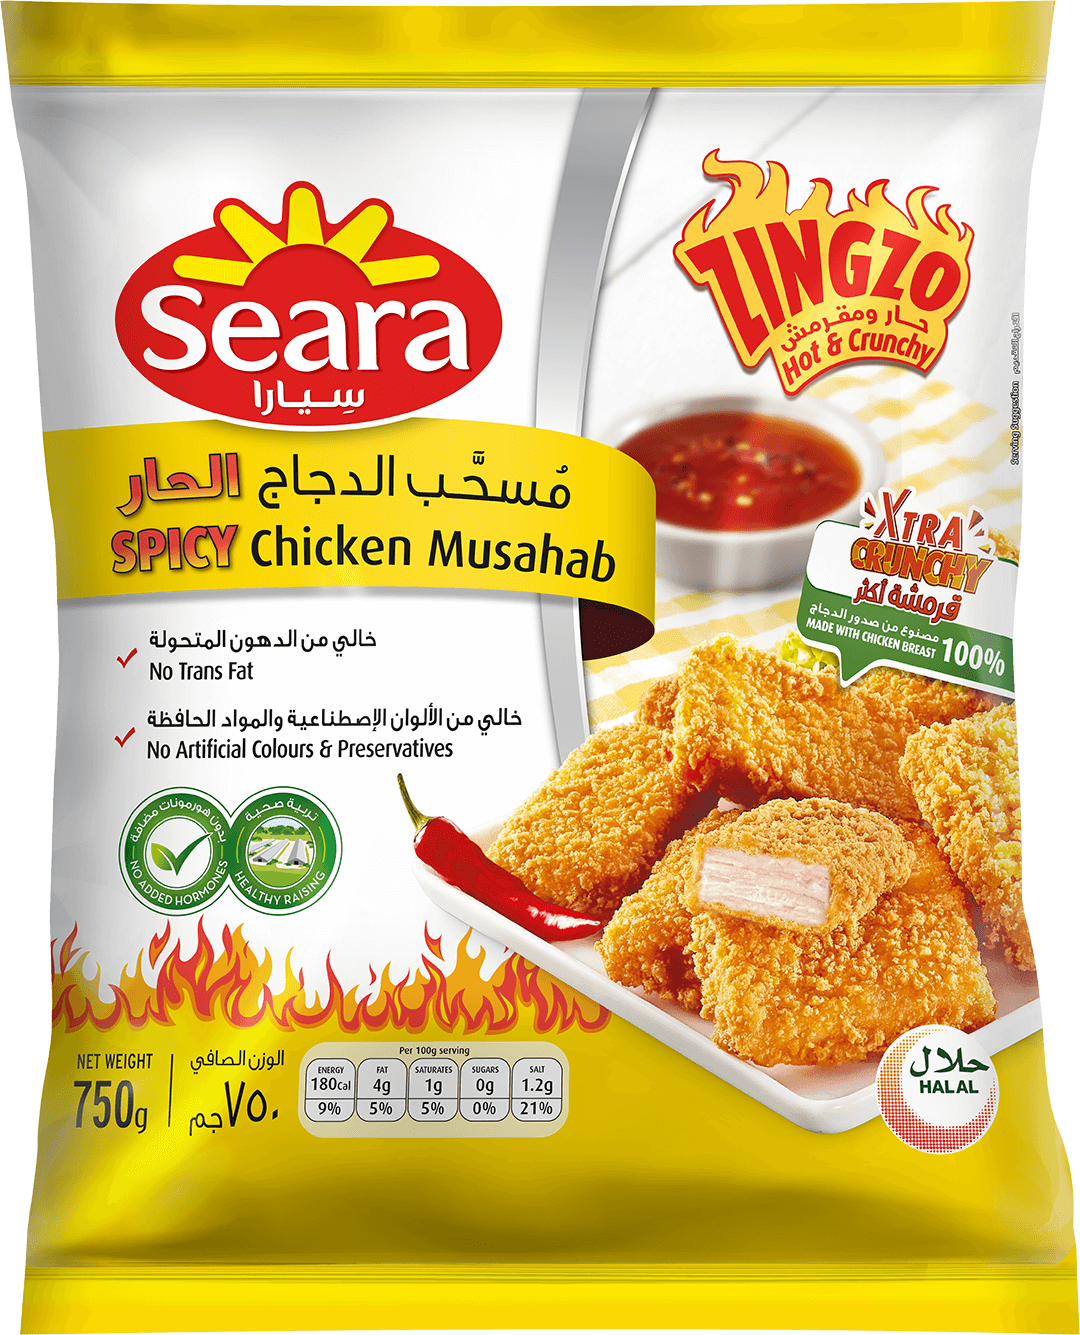 Seara Chicken Fingers Spicy / Zingzo (Musahab) 750G